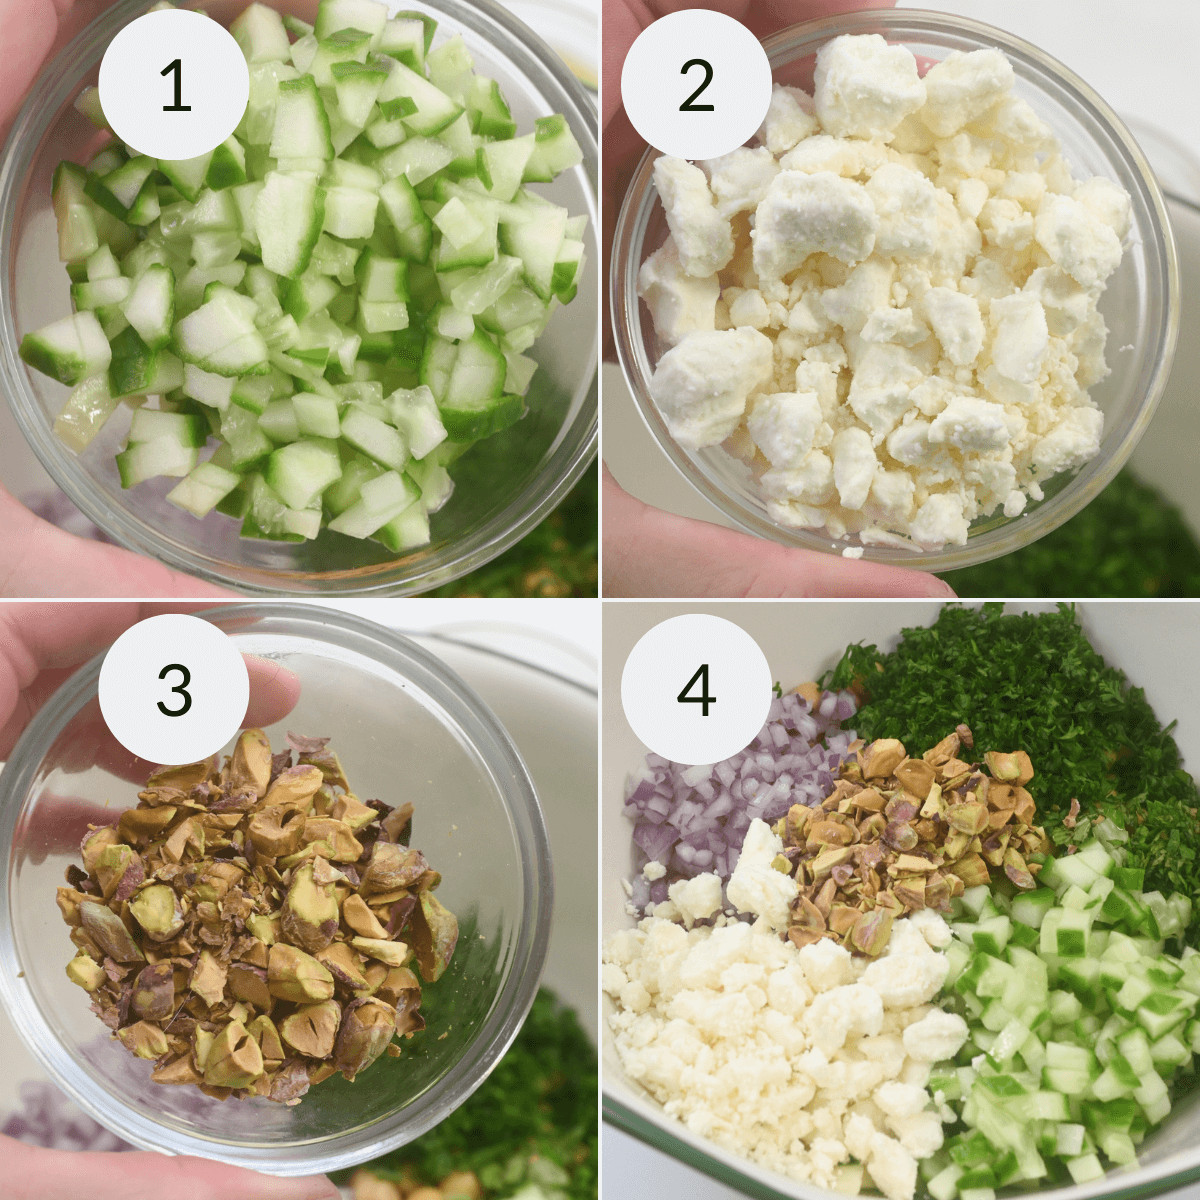 Four images showcasing ingredients for a Jennifer Aniston salad recipe: 1) diced cucumber, 2) crumbled feta cheese, 3) chopped olives, 4) a mix of